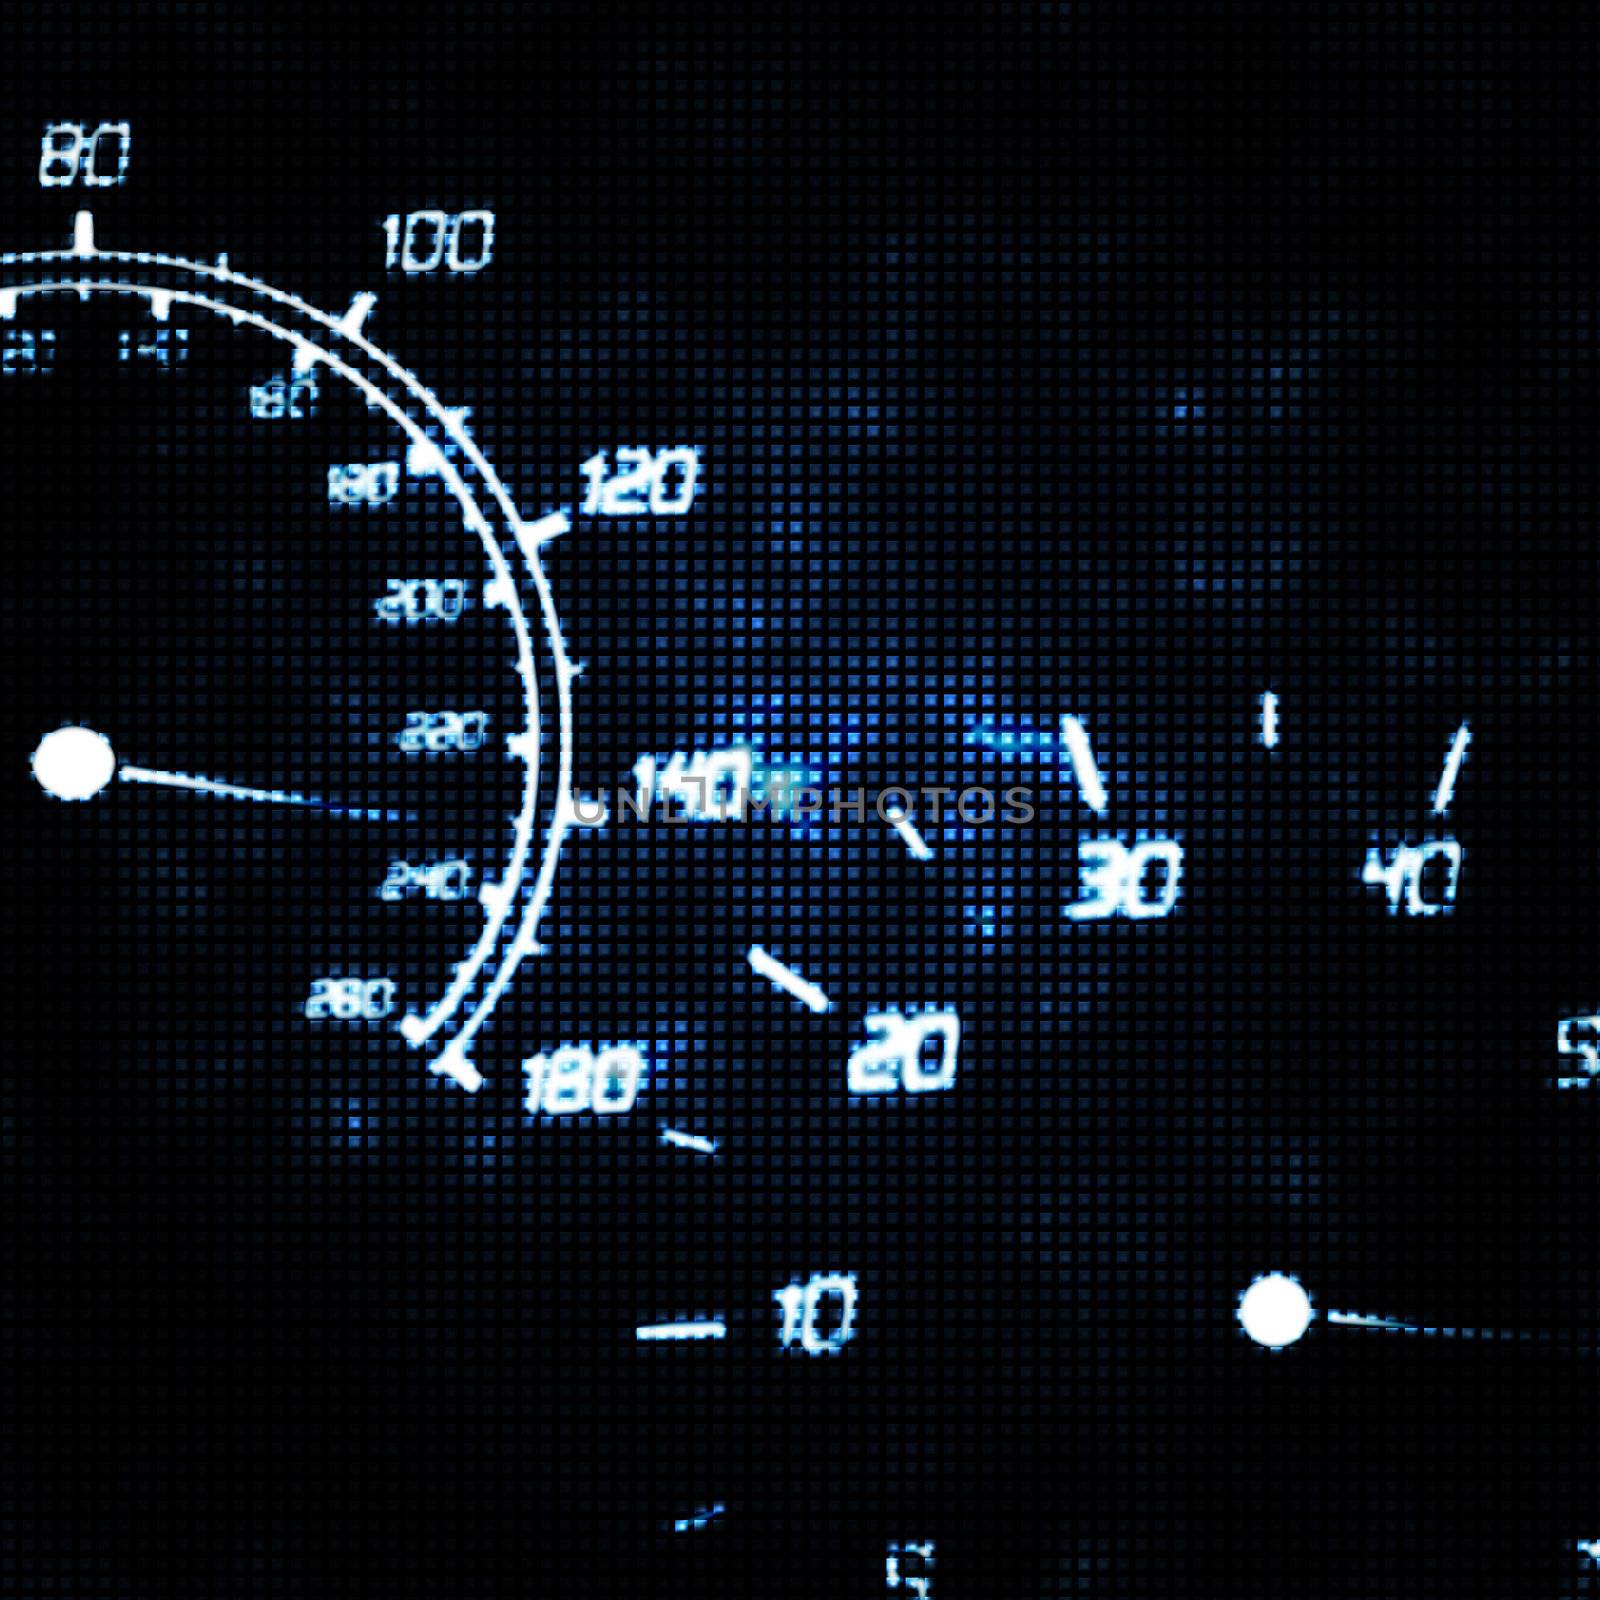 the speedometer and tachometer speeding abstract illustration